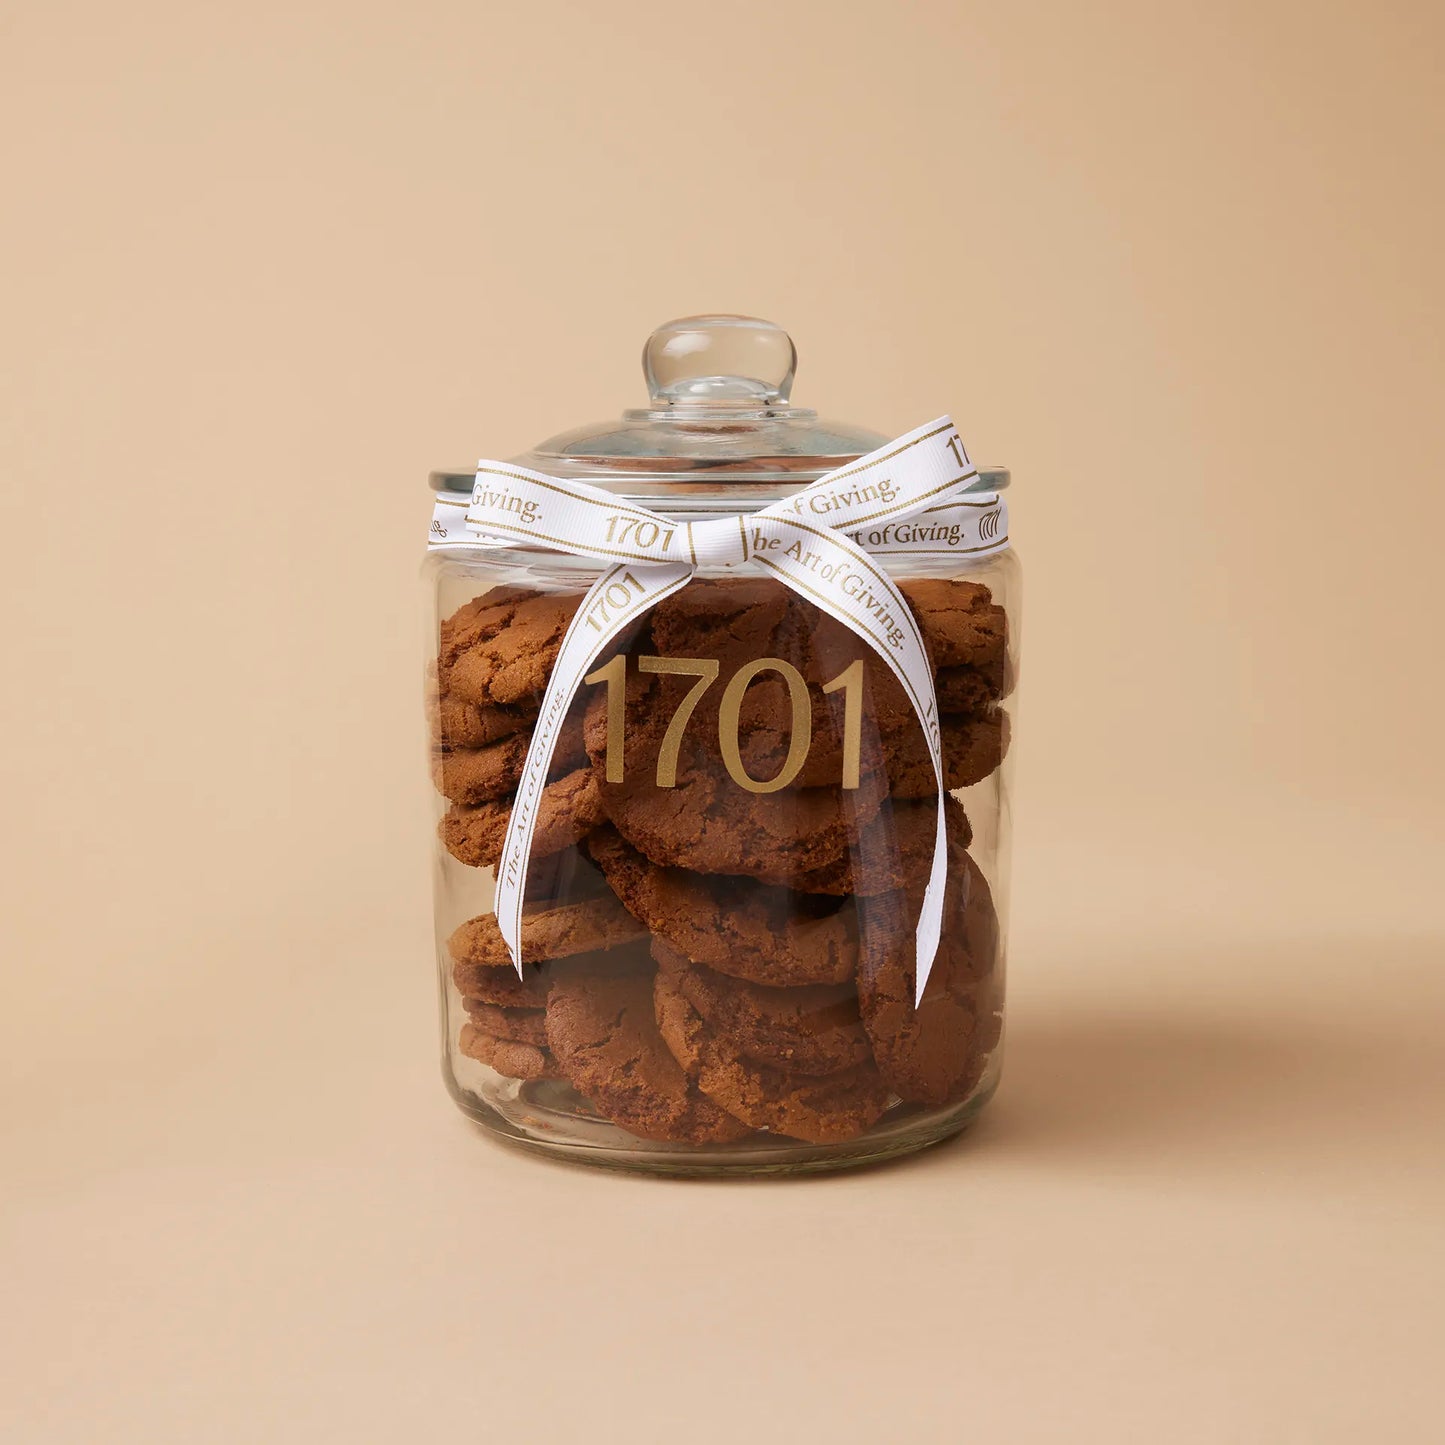 A 1kg glass jar of handmade ginger biscuits, presented in a glass jar with a hand-tied signature ribbon on a warm background, with the product label visible on the front of the jar. The biscuits are SANHA Halaal approved, making them a perfect gift idea for anyone who appreciates high-quality biscuits made with care.